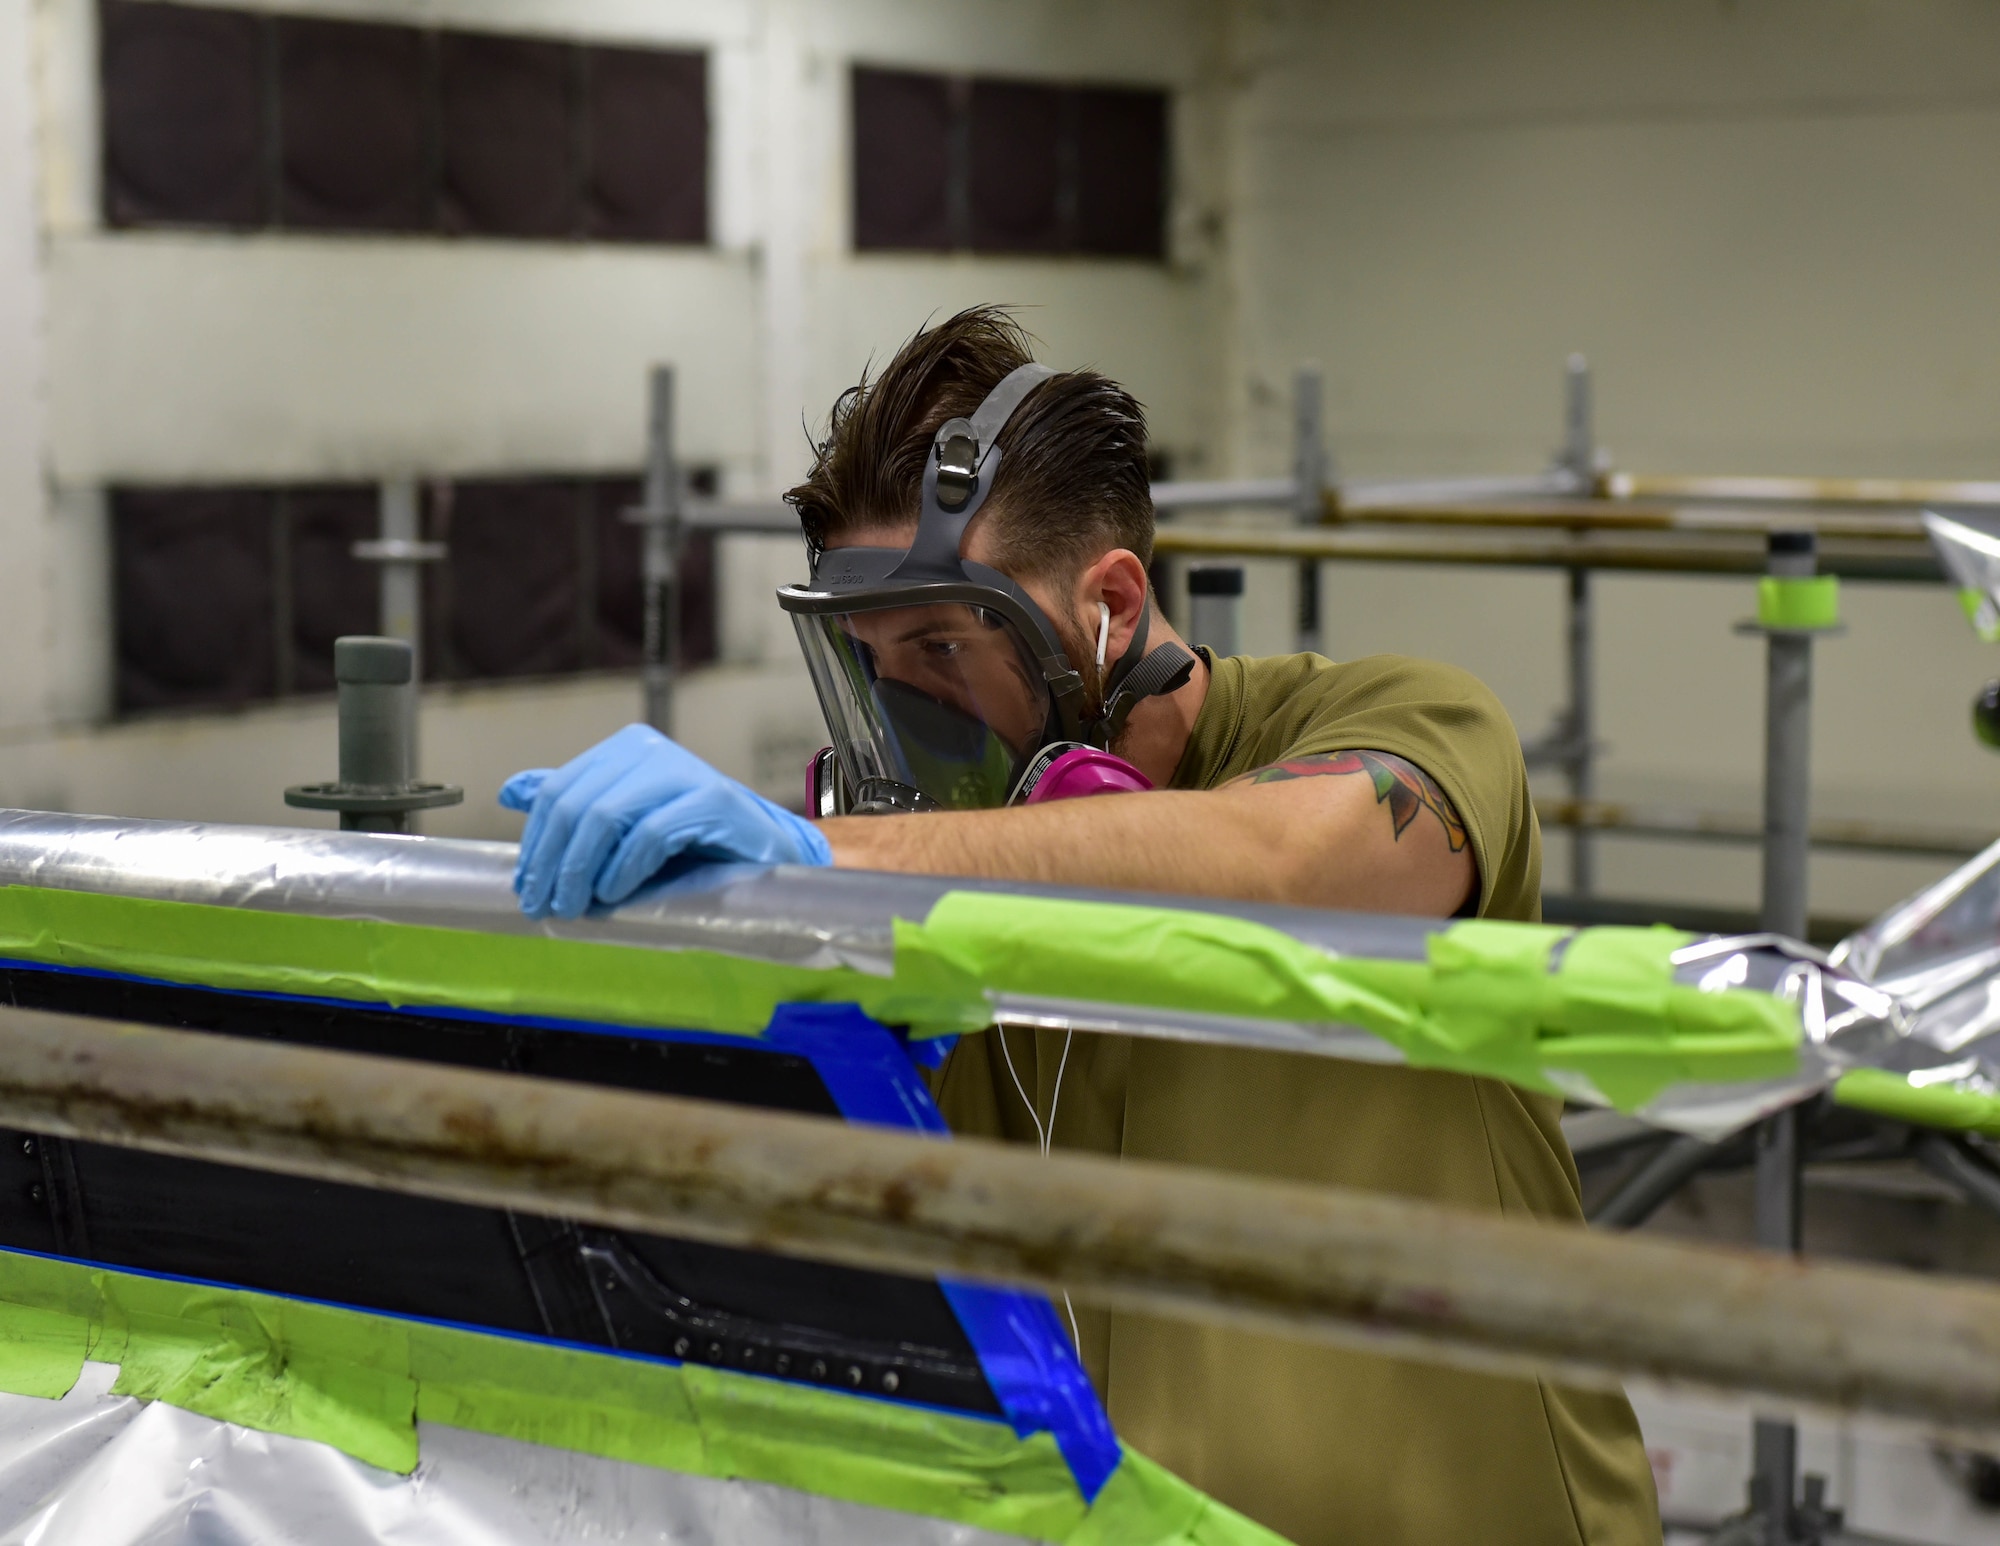 Staff Sgt. Chad Courtwright, CTK Custodian, of the 4th Equipment Maintenance Squadron makes small corrections on the tail flash of an F-15 Eagle aircraft. The paint is inspired by the 336th Fighter Generation Squadron emblem.(U.S. Air Force photo by Senior Airman Taylor Hunter)